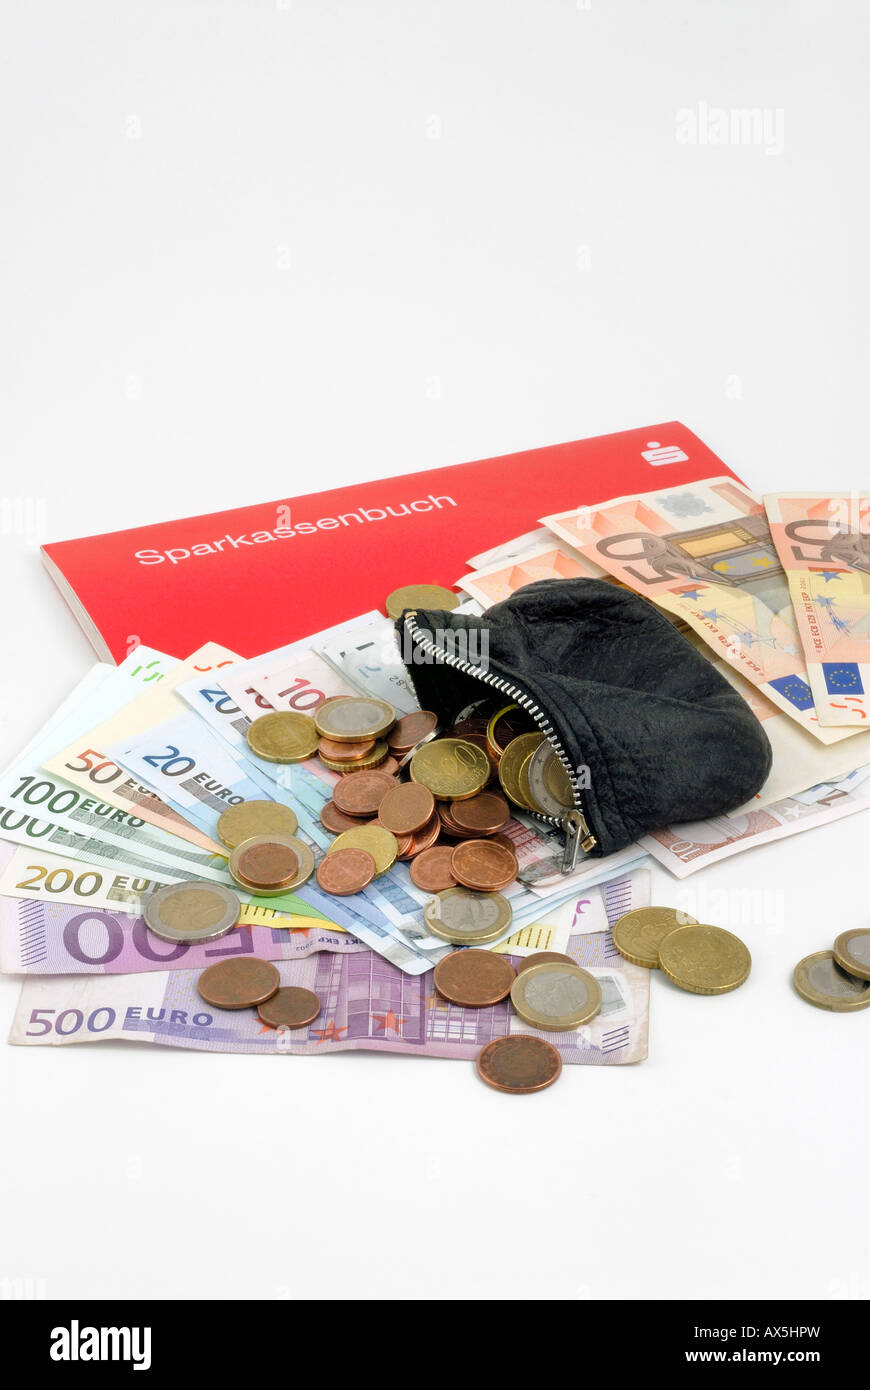 Euro notes and coins, wallet on a bank book Stock Photo